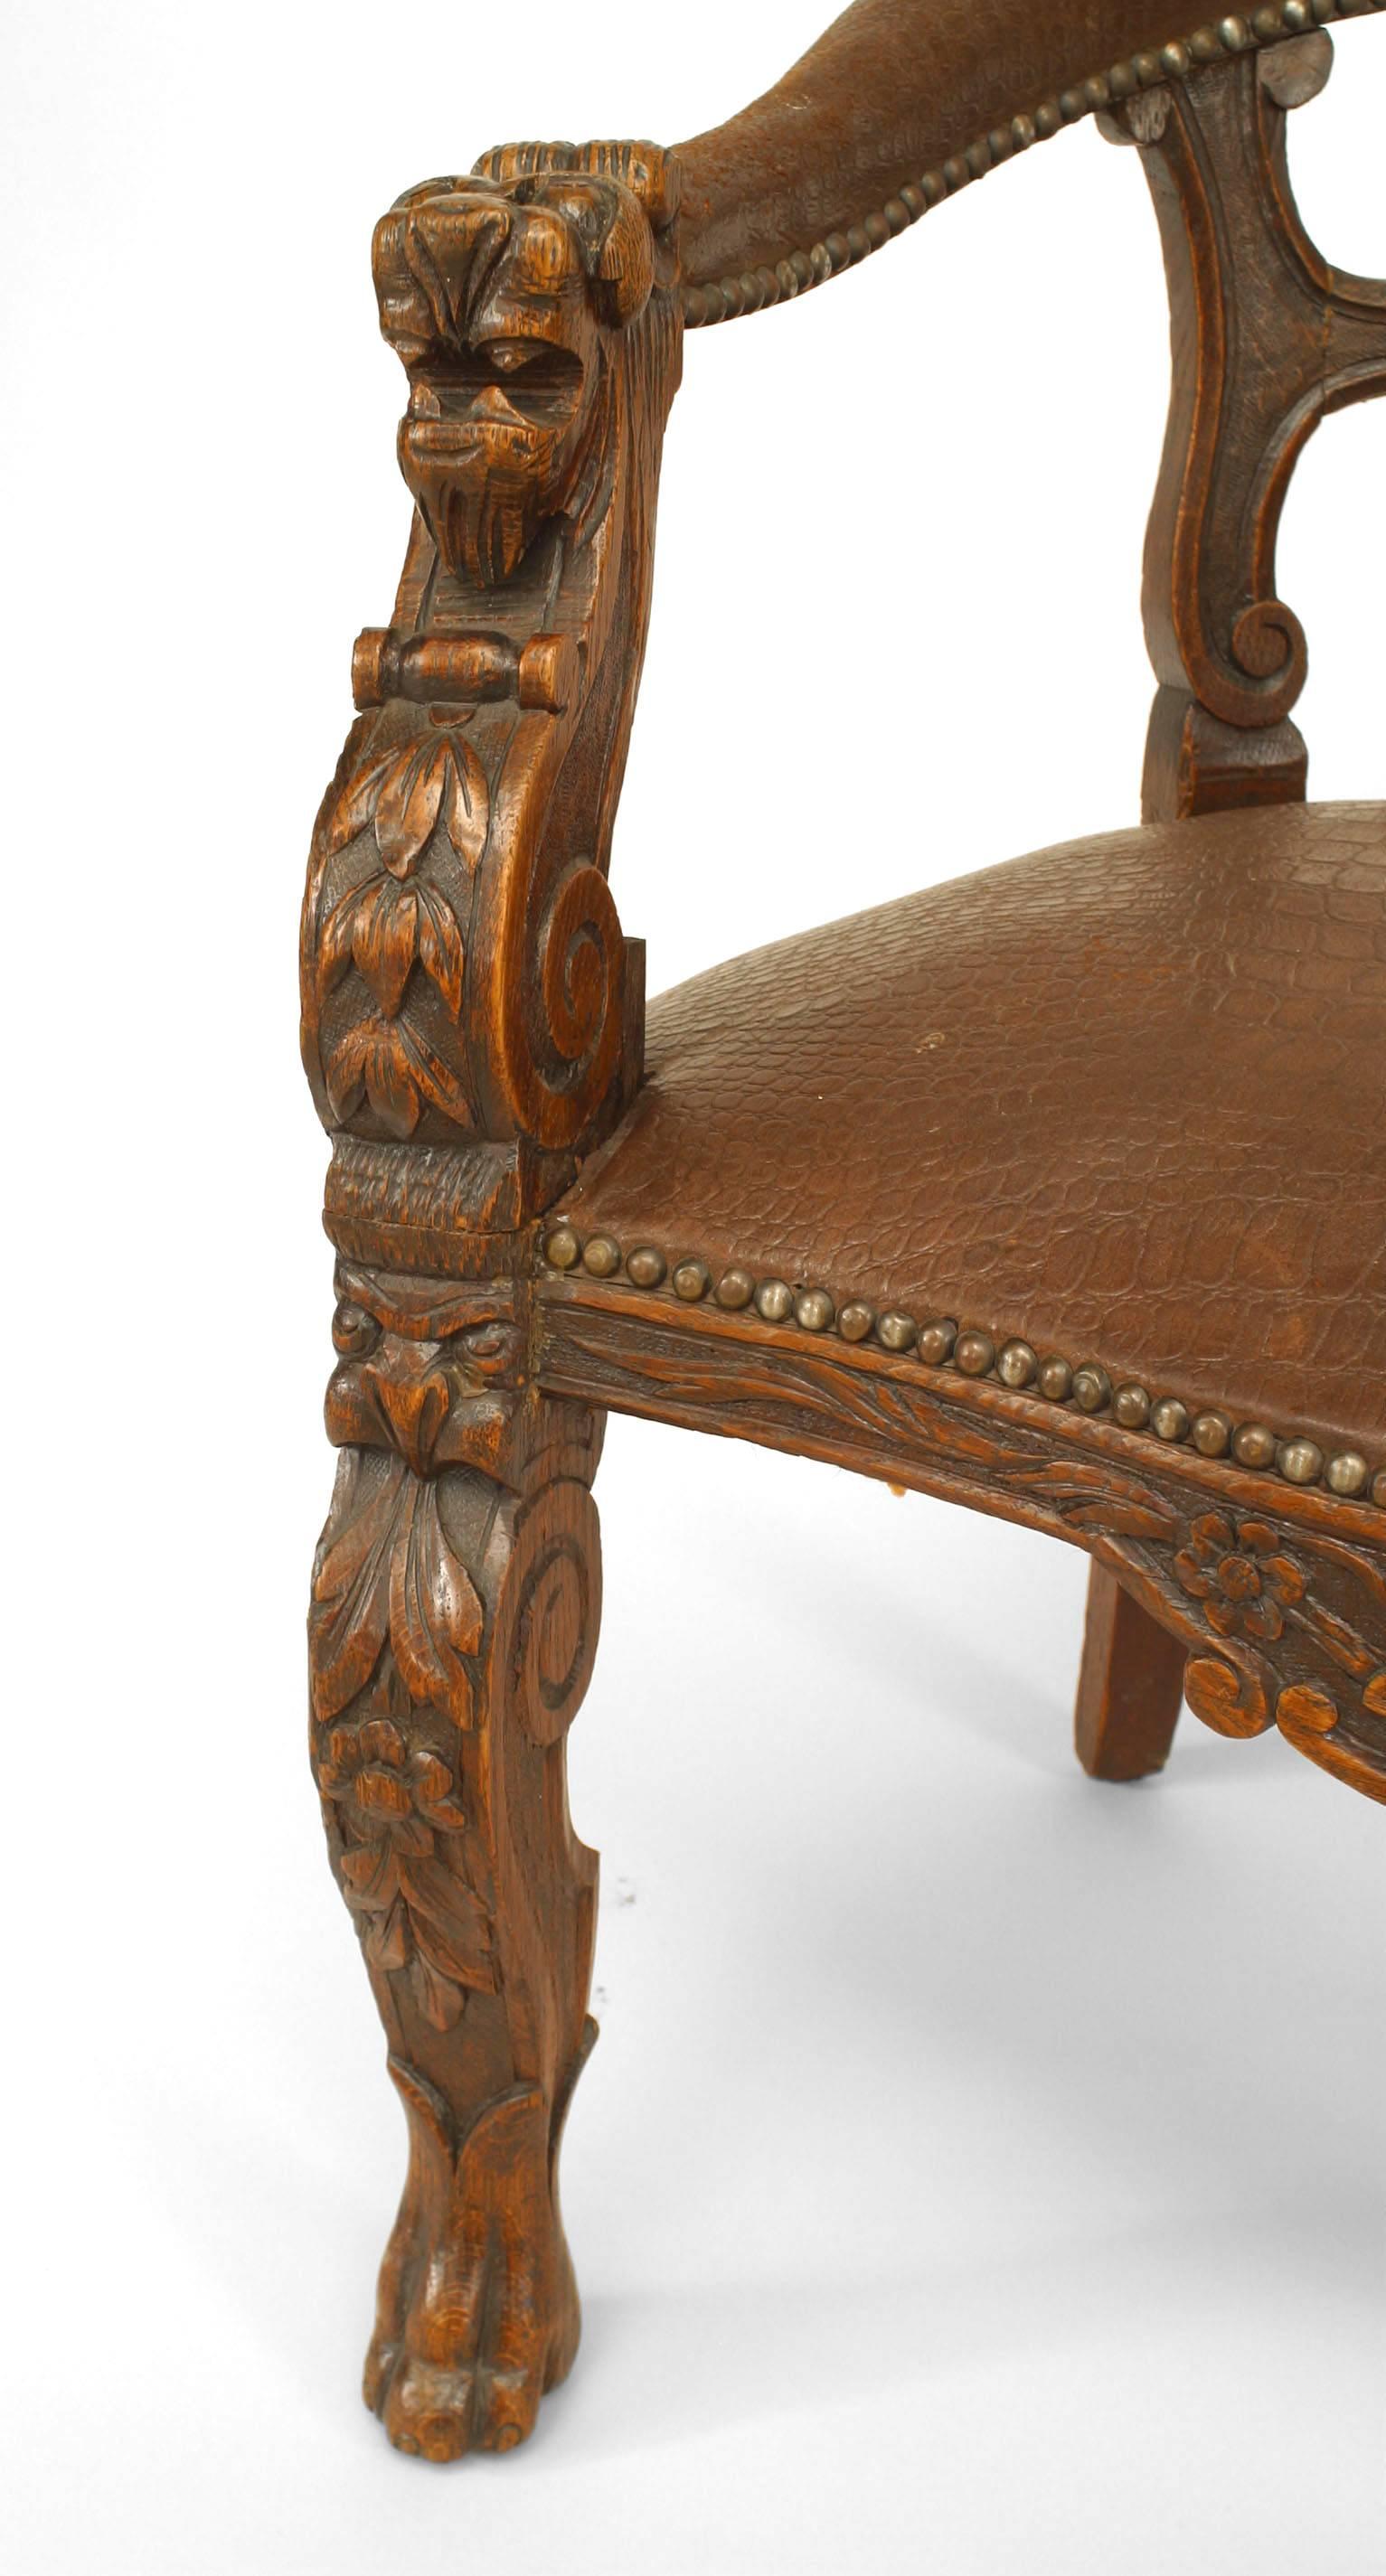 English Victorian oak round open back character armchair with carved heads on arms and dark brown leather upholstered seat and back rail (similar to Inv. #044315).
 